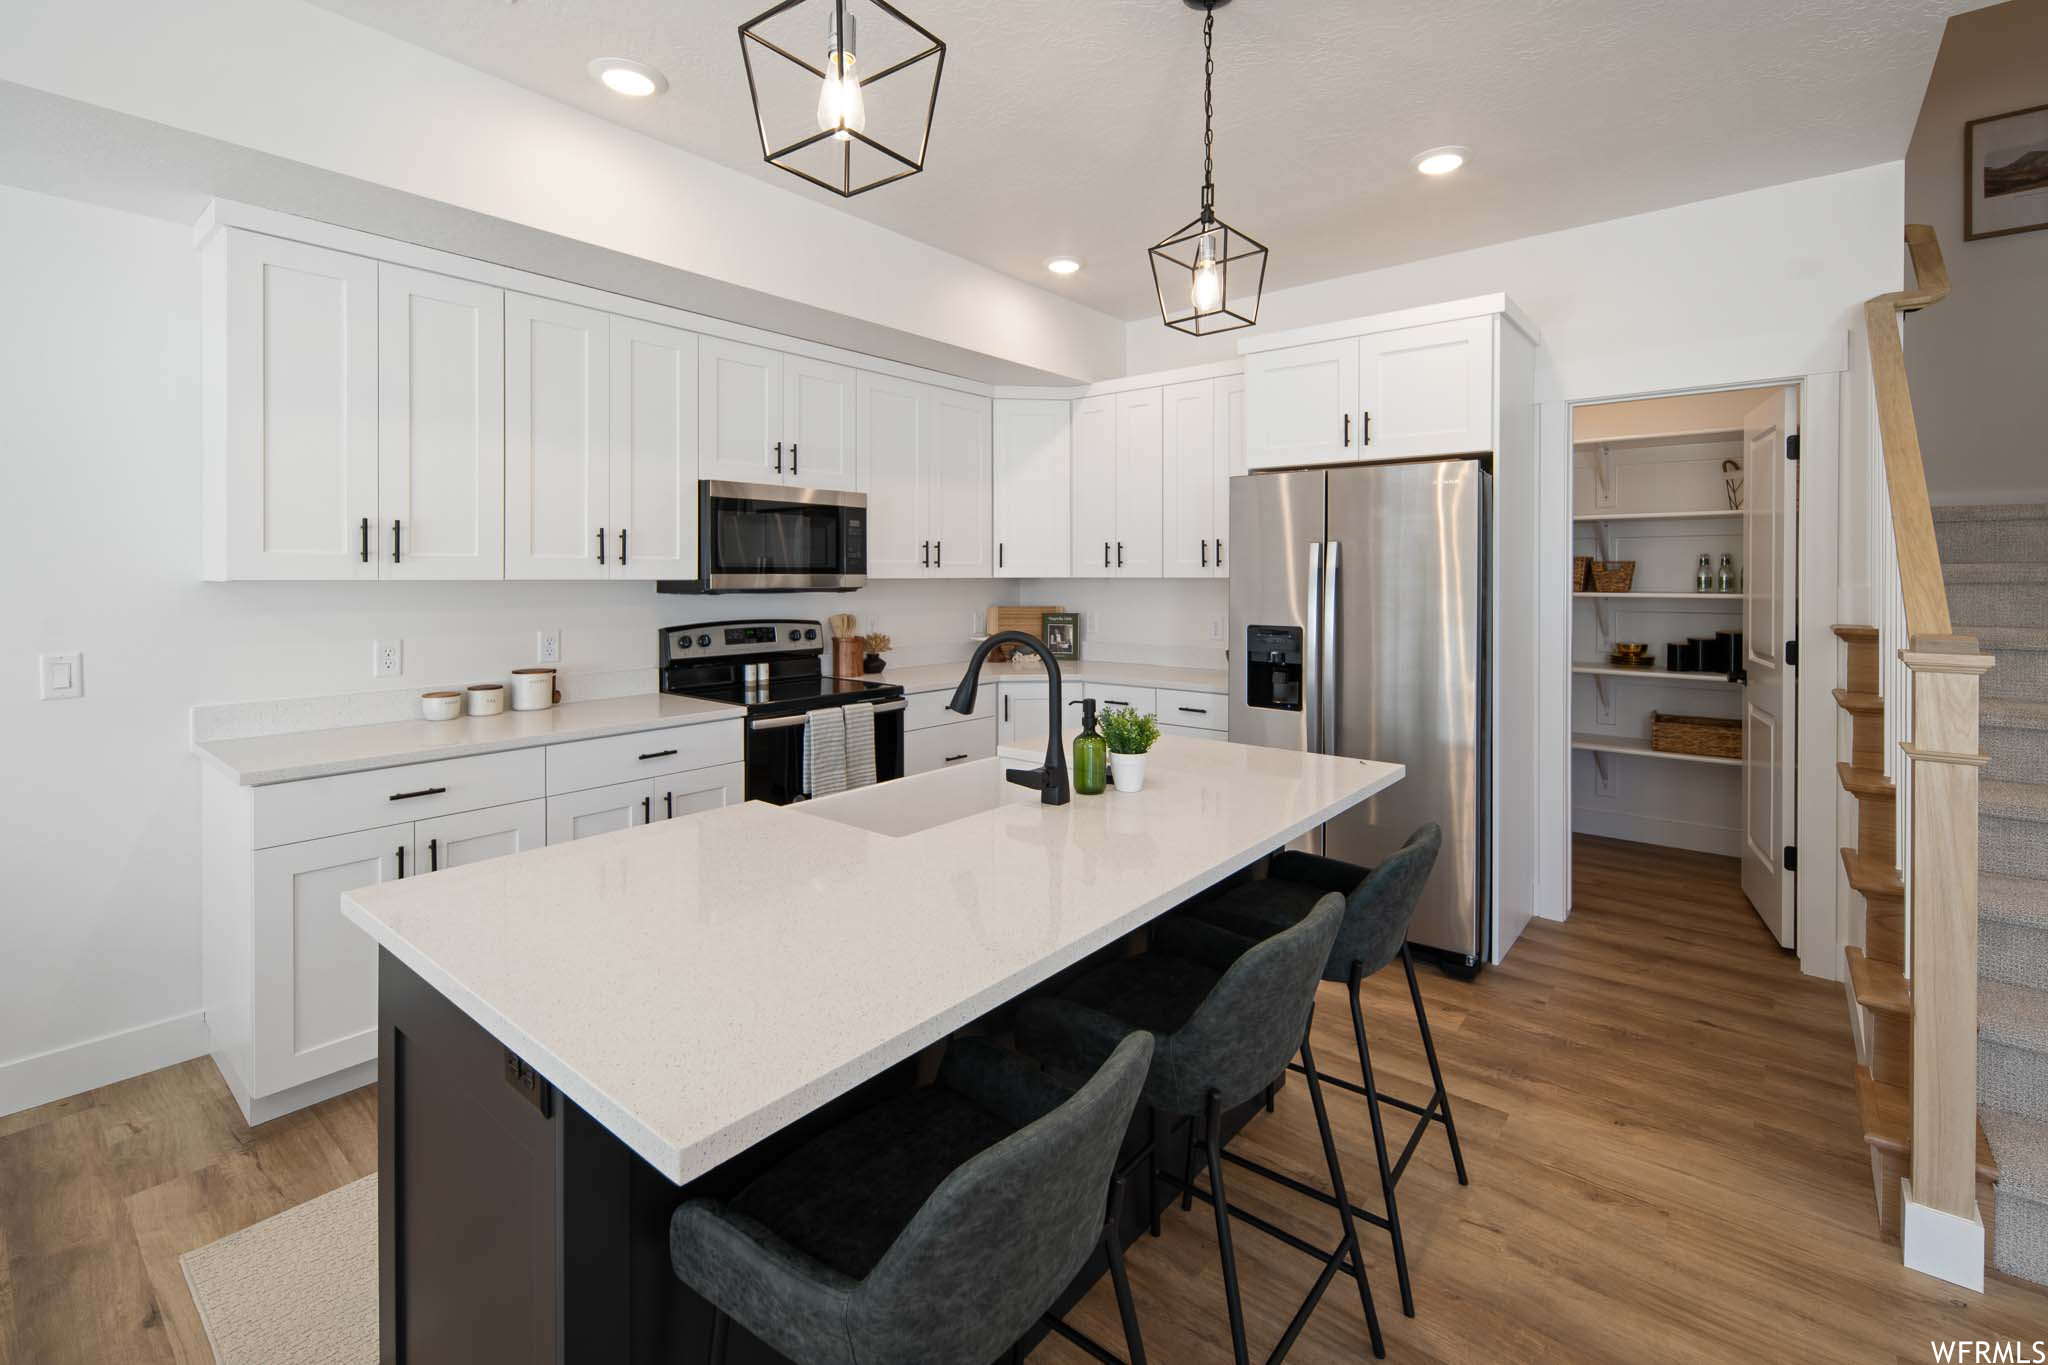 Kitchen featuring pendant lighting, white cabinetry, light hardwood floors, and appliances with stainless steel finishes